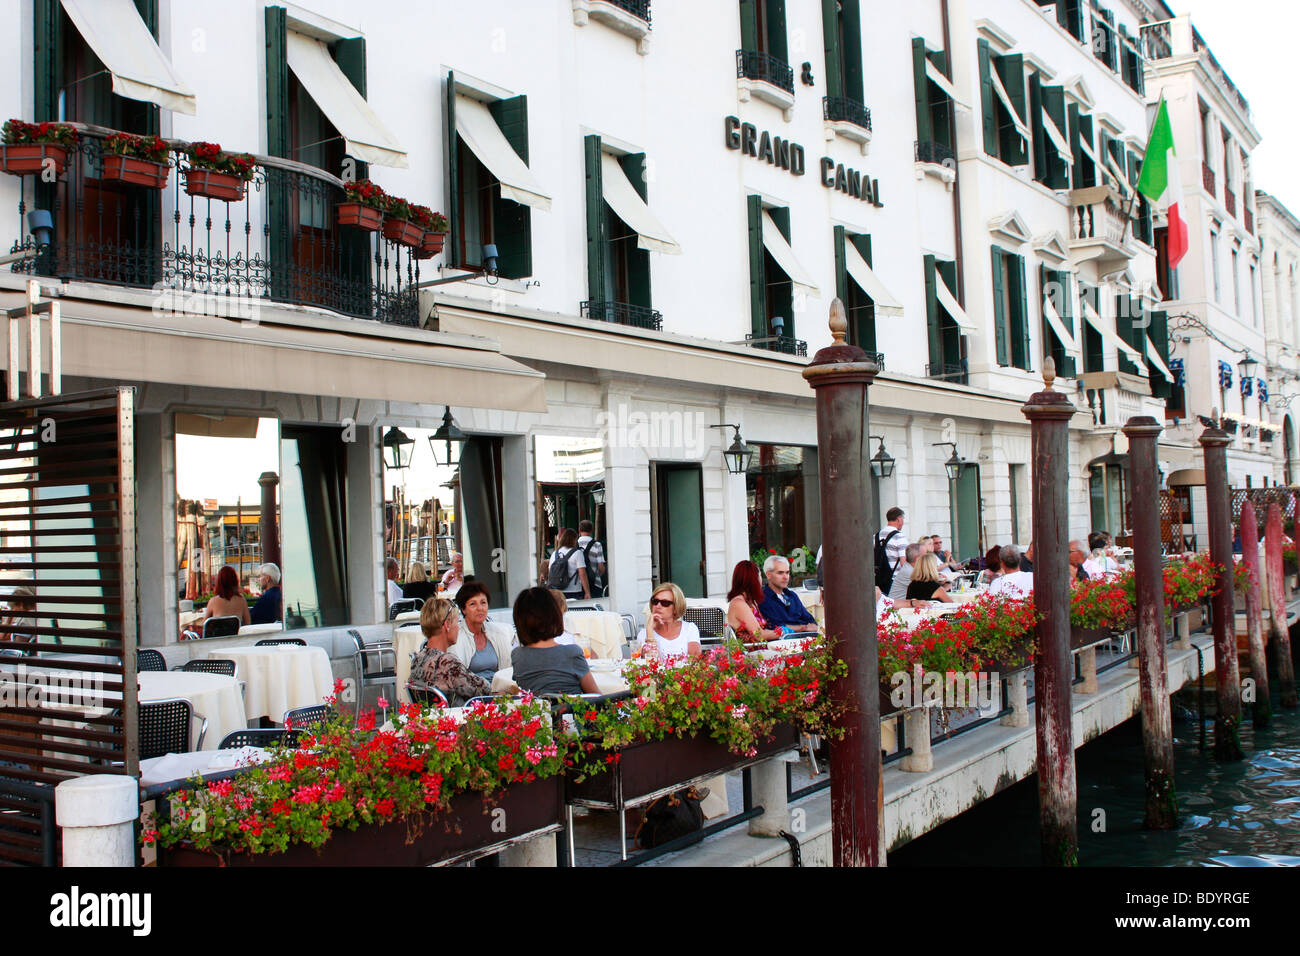 The 'canal side' terrace of the Grand Canal Hotel , Venice,Italy,is a popular place to relax and watch the world go by Stock Photo